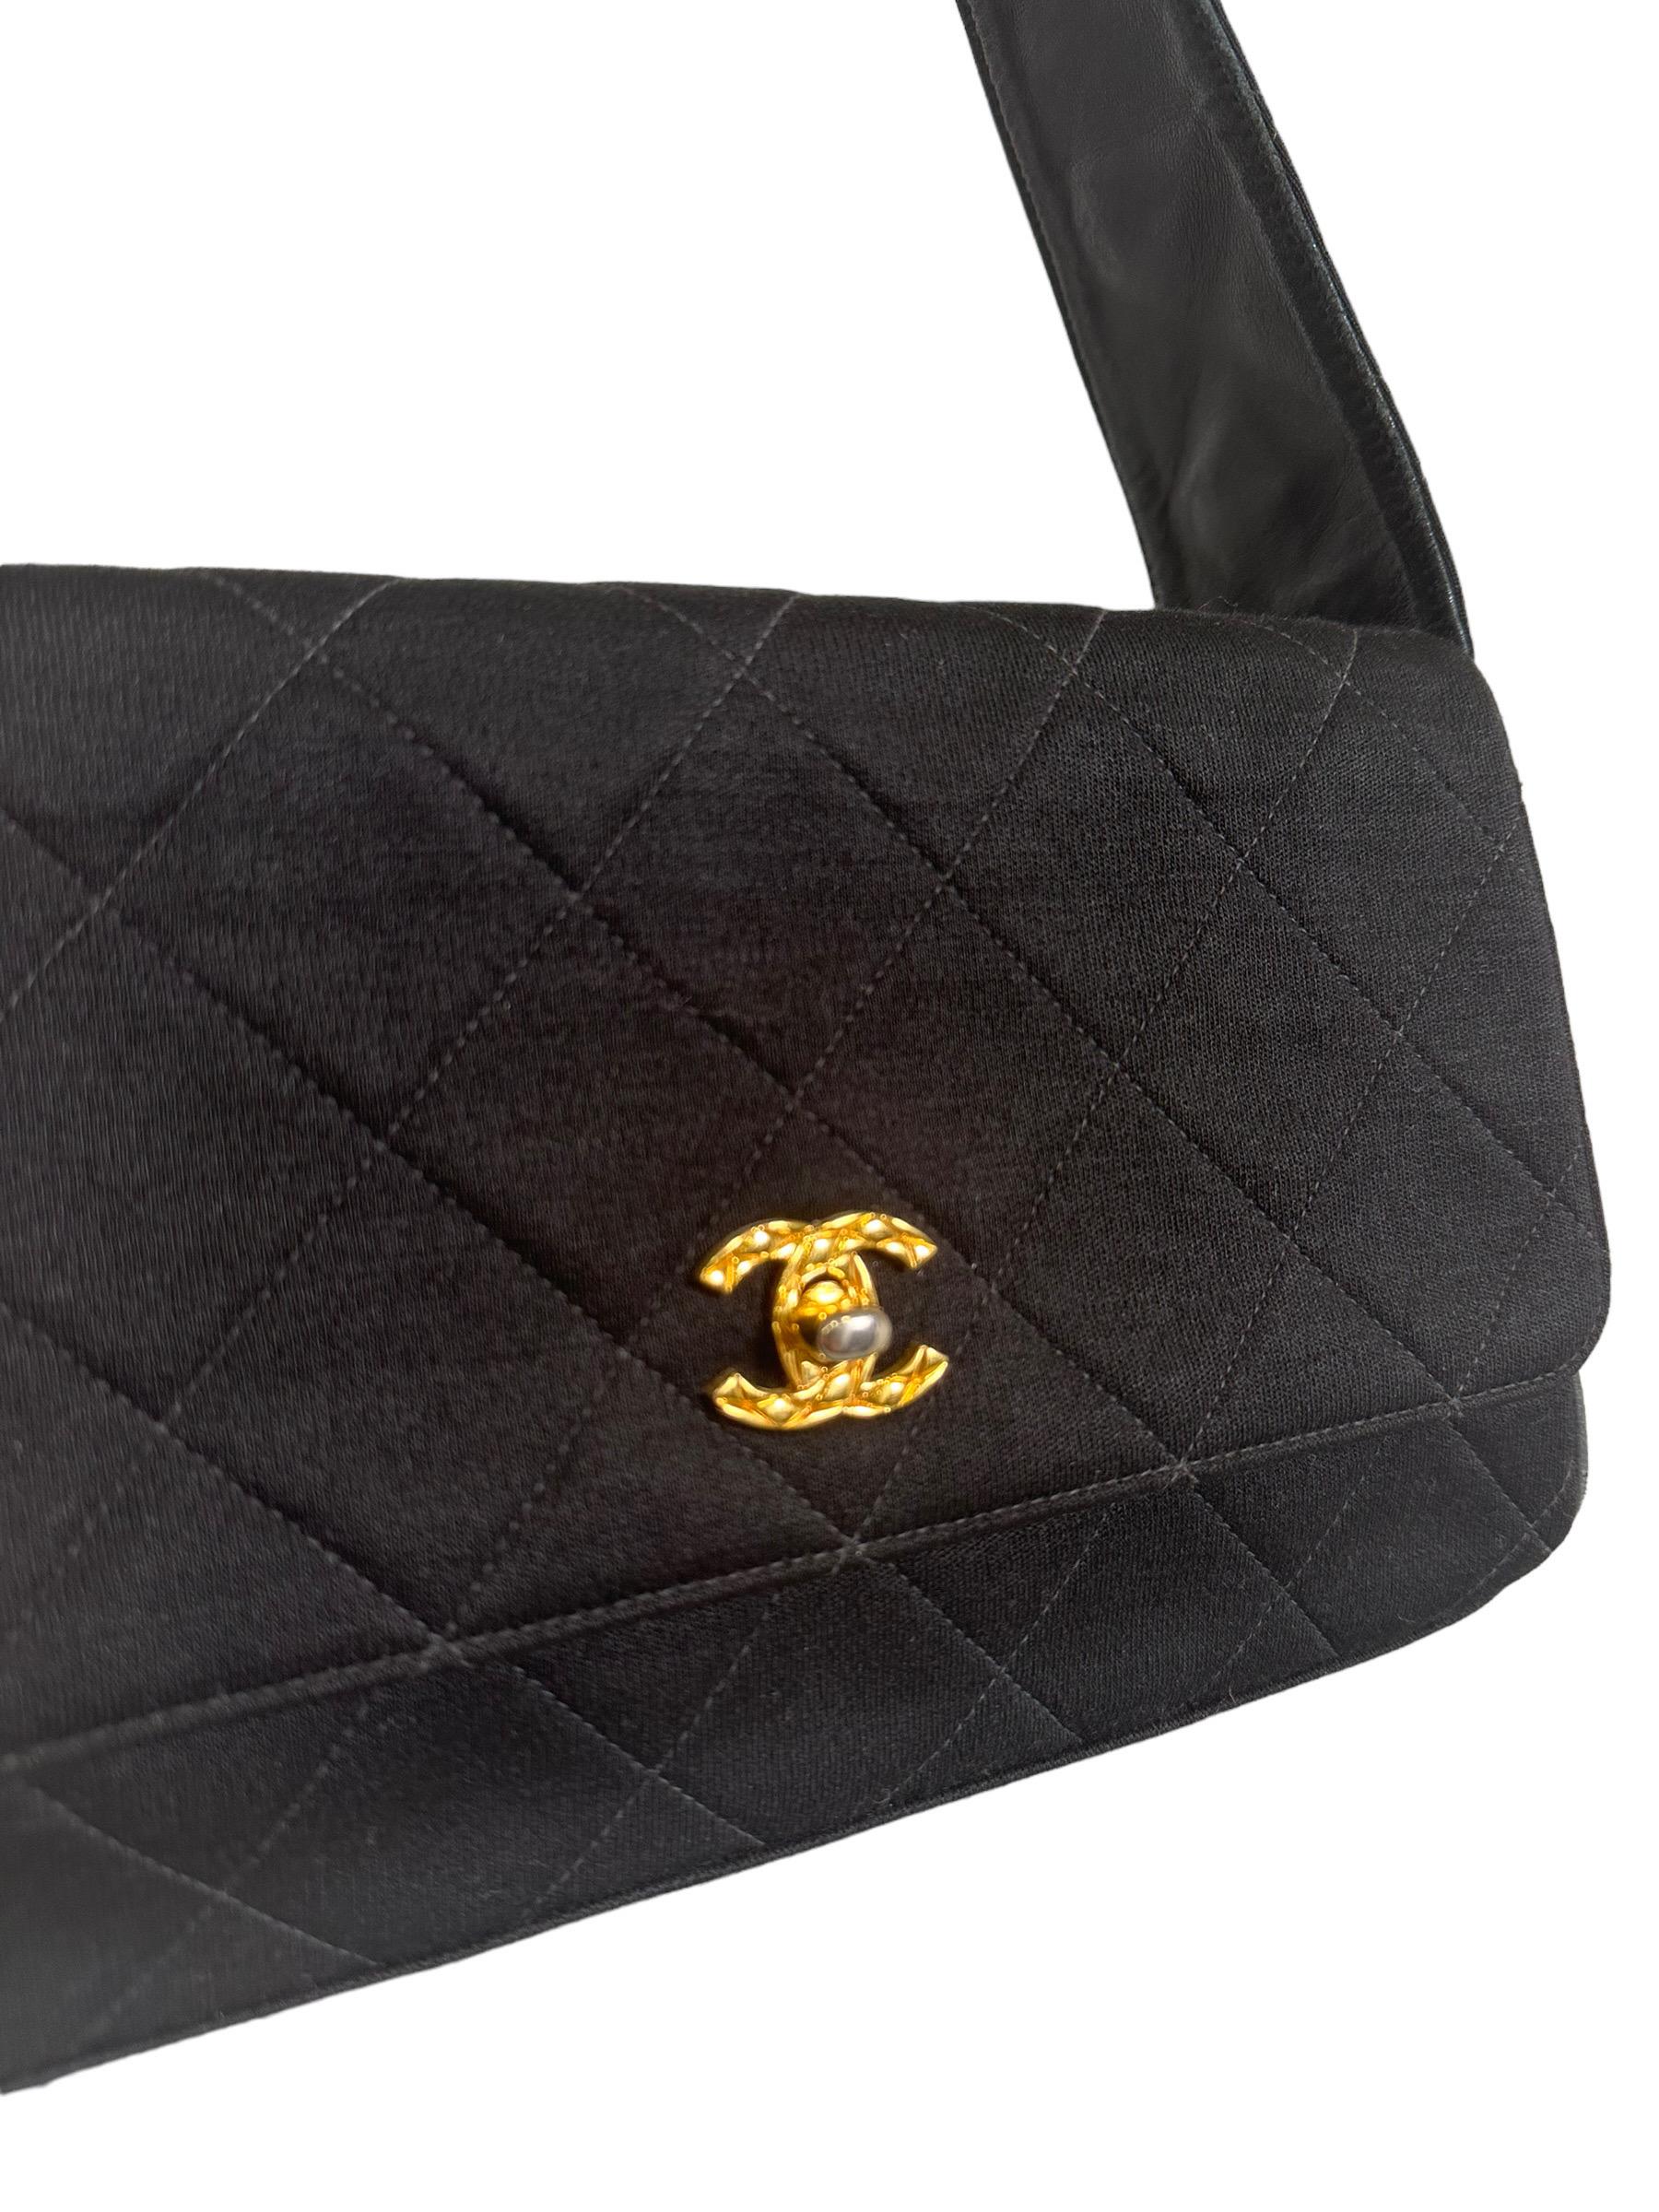 Chanel signed bag, vintage model, made of black quilted canvas with golden hardware. Equipped with a flap with twist lock with CC logo, internally covered in black leather, quite large. Equipped with a canvas shoulder handle and internal pockets